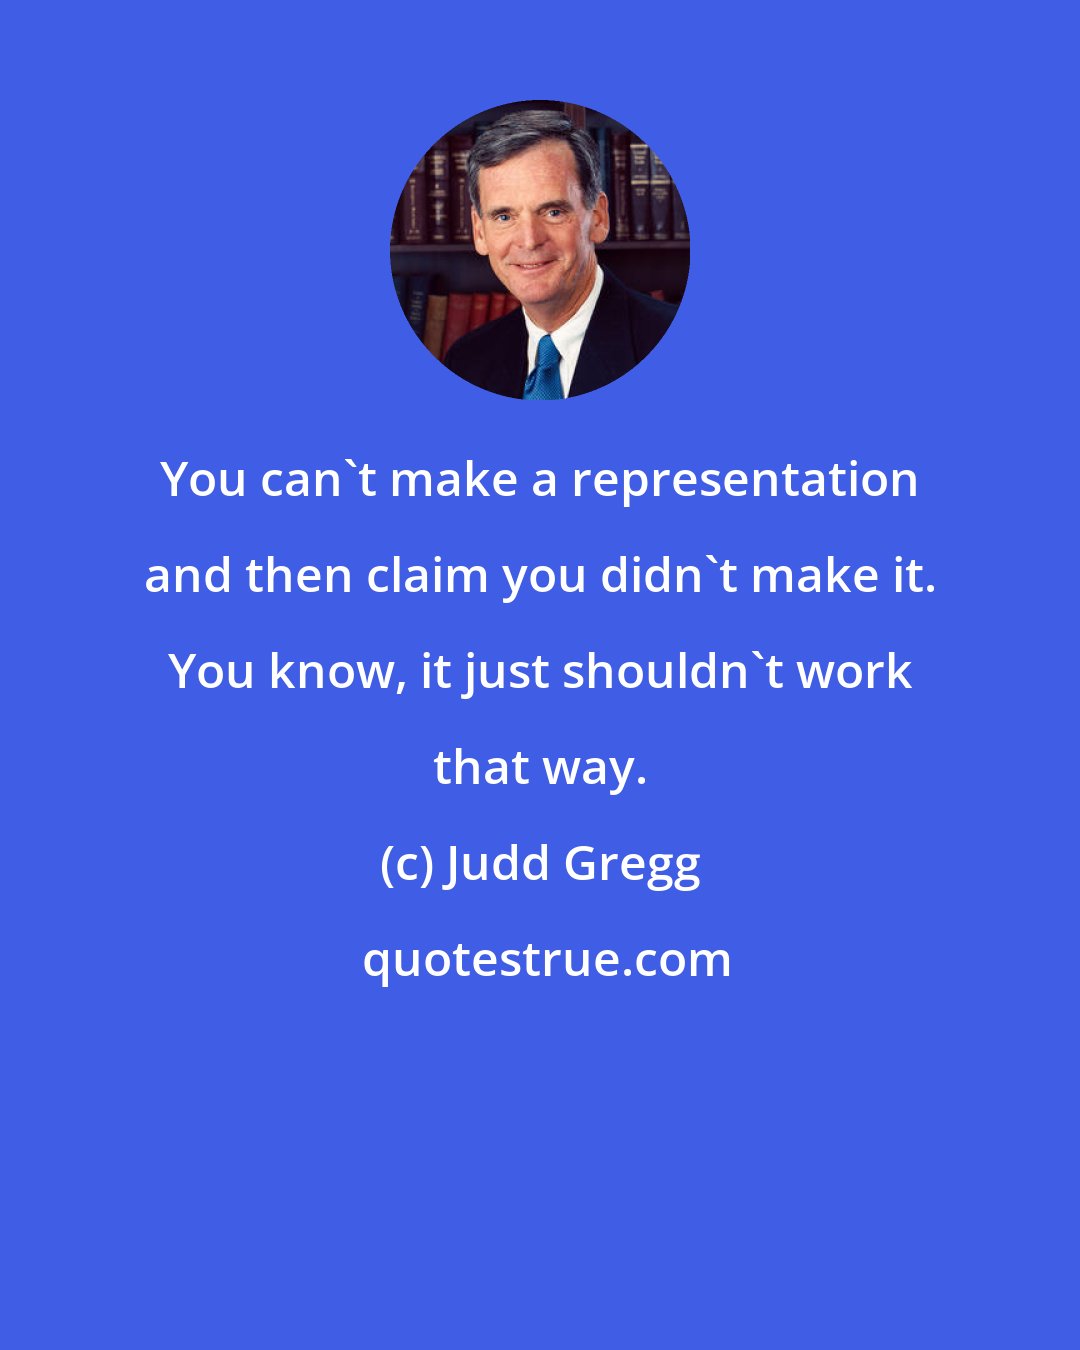 Judd Gregg: You can't make a representation and then claim you didn't make it. You know, it just shouldn't work that way.